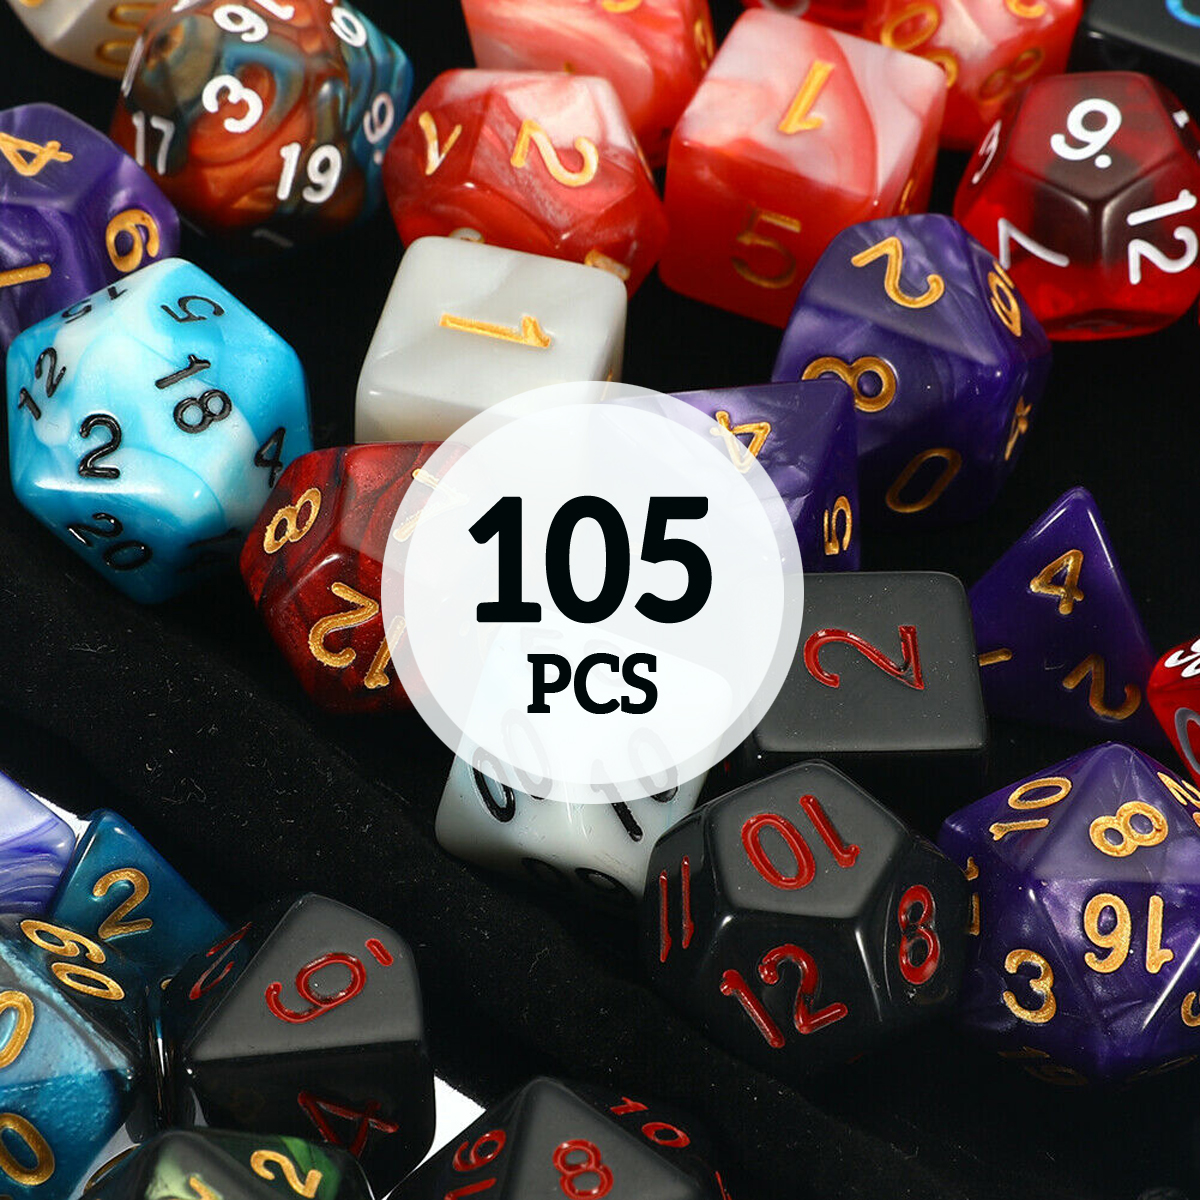 105-Pcs-Dice-Set-Polyhedral-Dices-7-Color-Role-Playing-Table-Game-With-Cloth-Game-Multi-sied-Dice-1574100-2